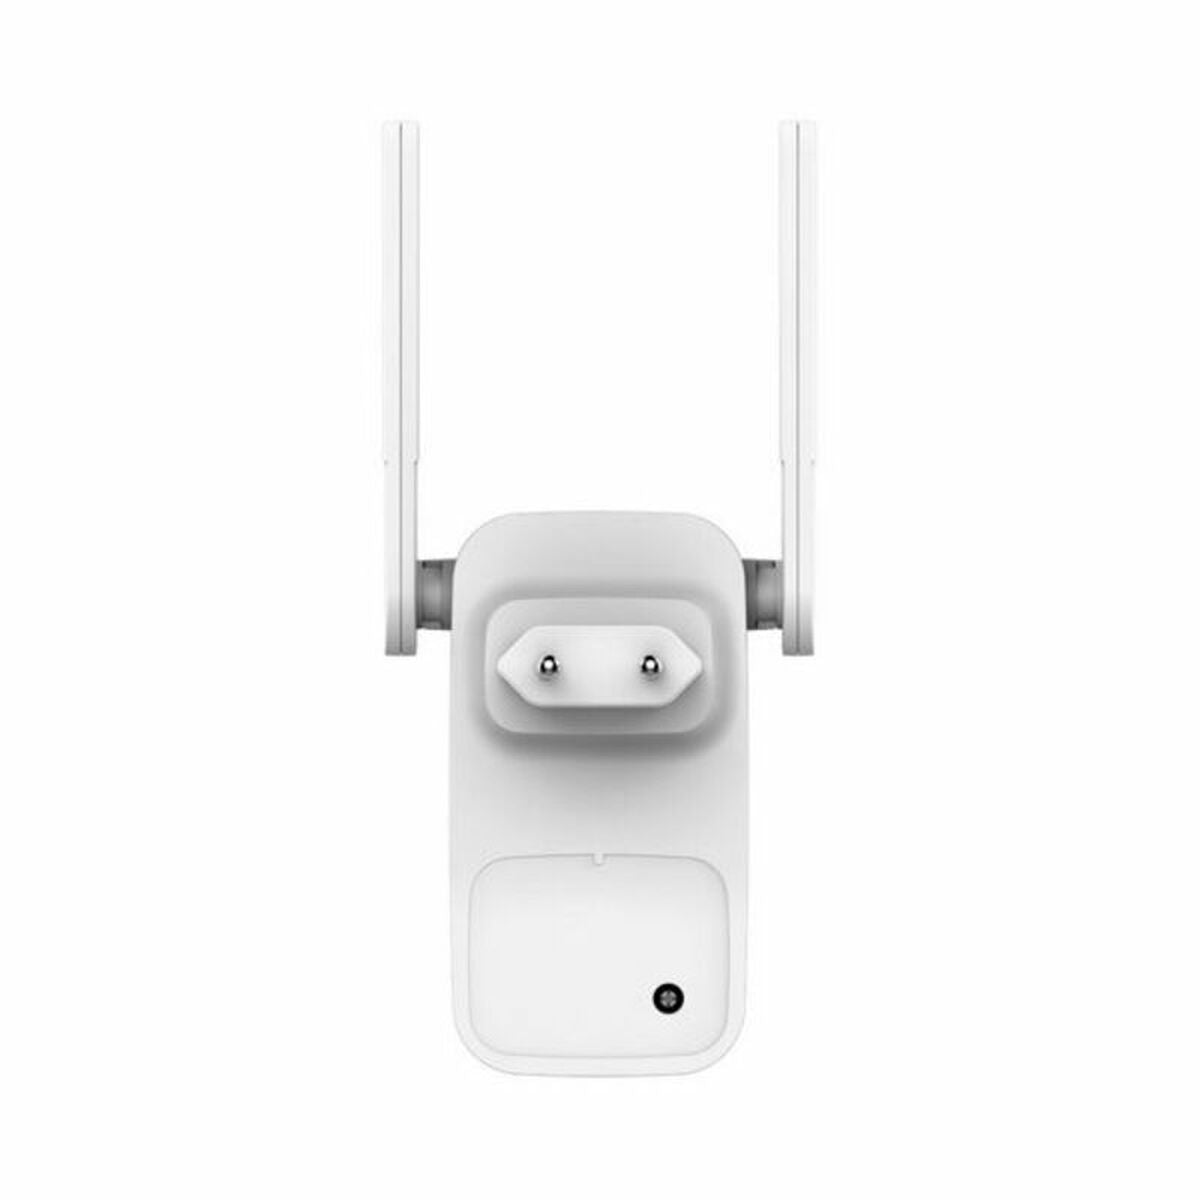 Access Point Repeater D-Link DAP-1610             LAN WIFI White, D-Link, Computing, Network devices, access-point-repeater-d-link-dap-1610-lan-wifi-white, Brand_D-Link, category-reference-2609, category-reference-2803, category-reference-2820, category-reference-t-19685, category-reference-t-19914, Condition_NEW, ferretería, networks/wiring, Price_50 - 100, Teleworking, RiotNook